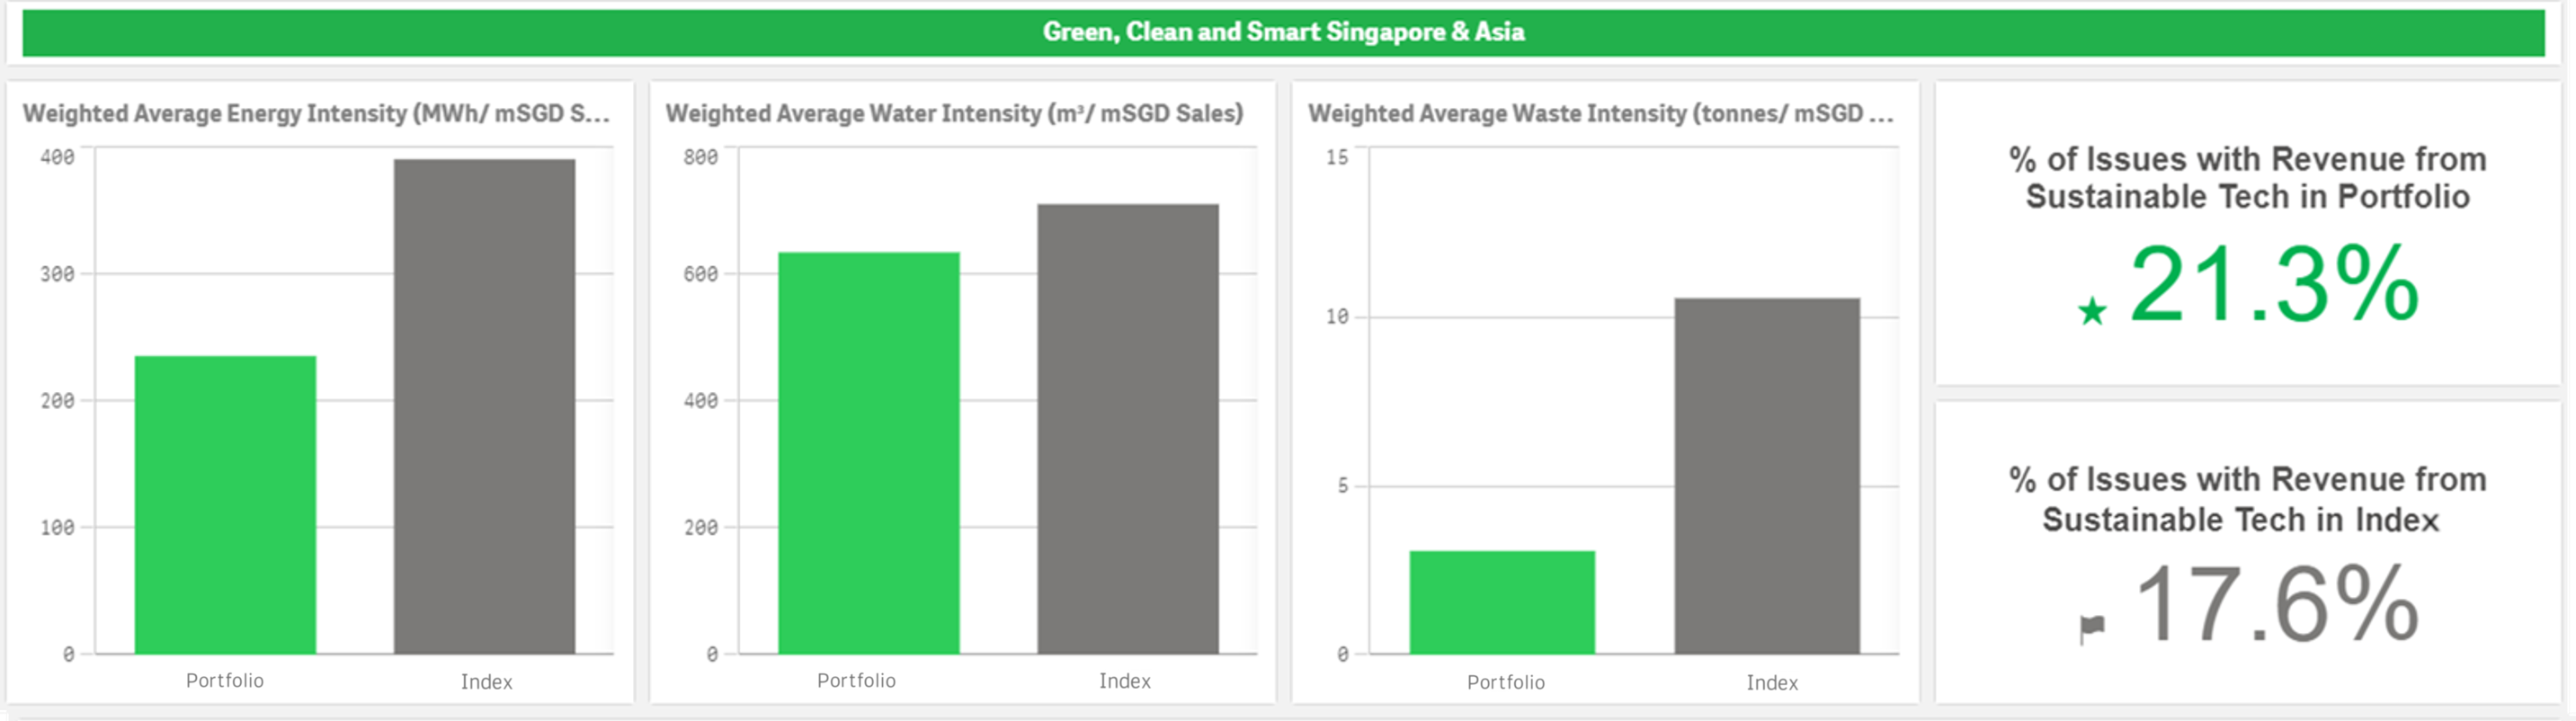 Green, Clean and Smart Singapore
